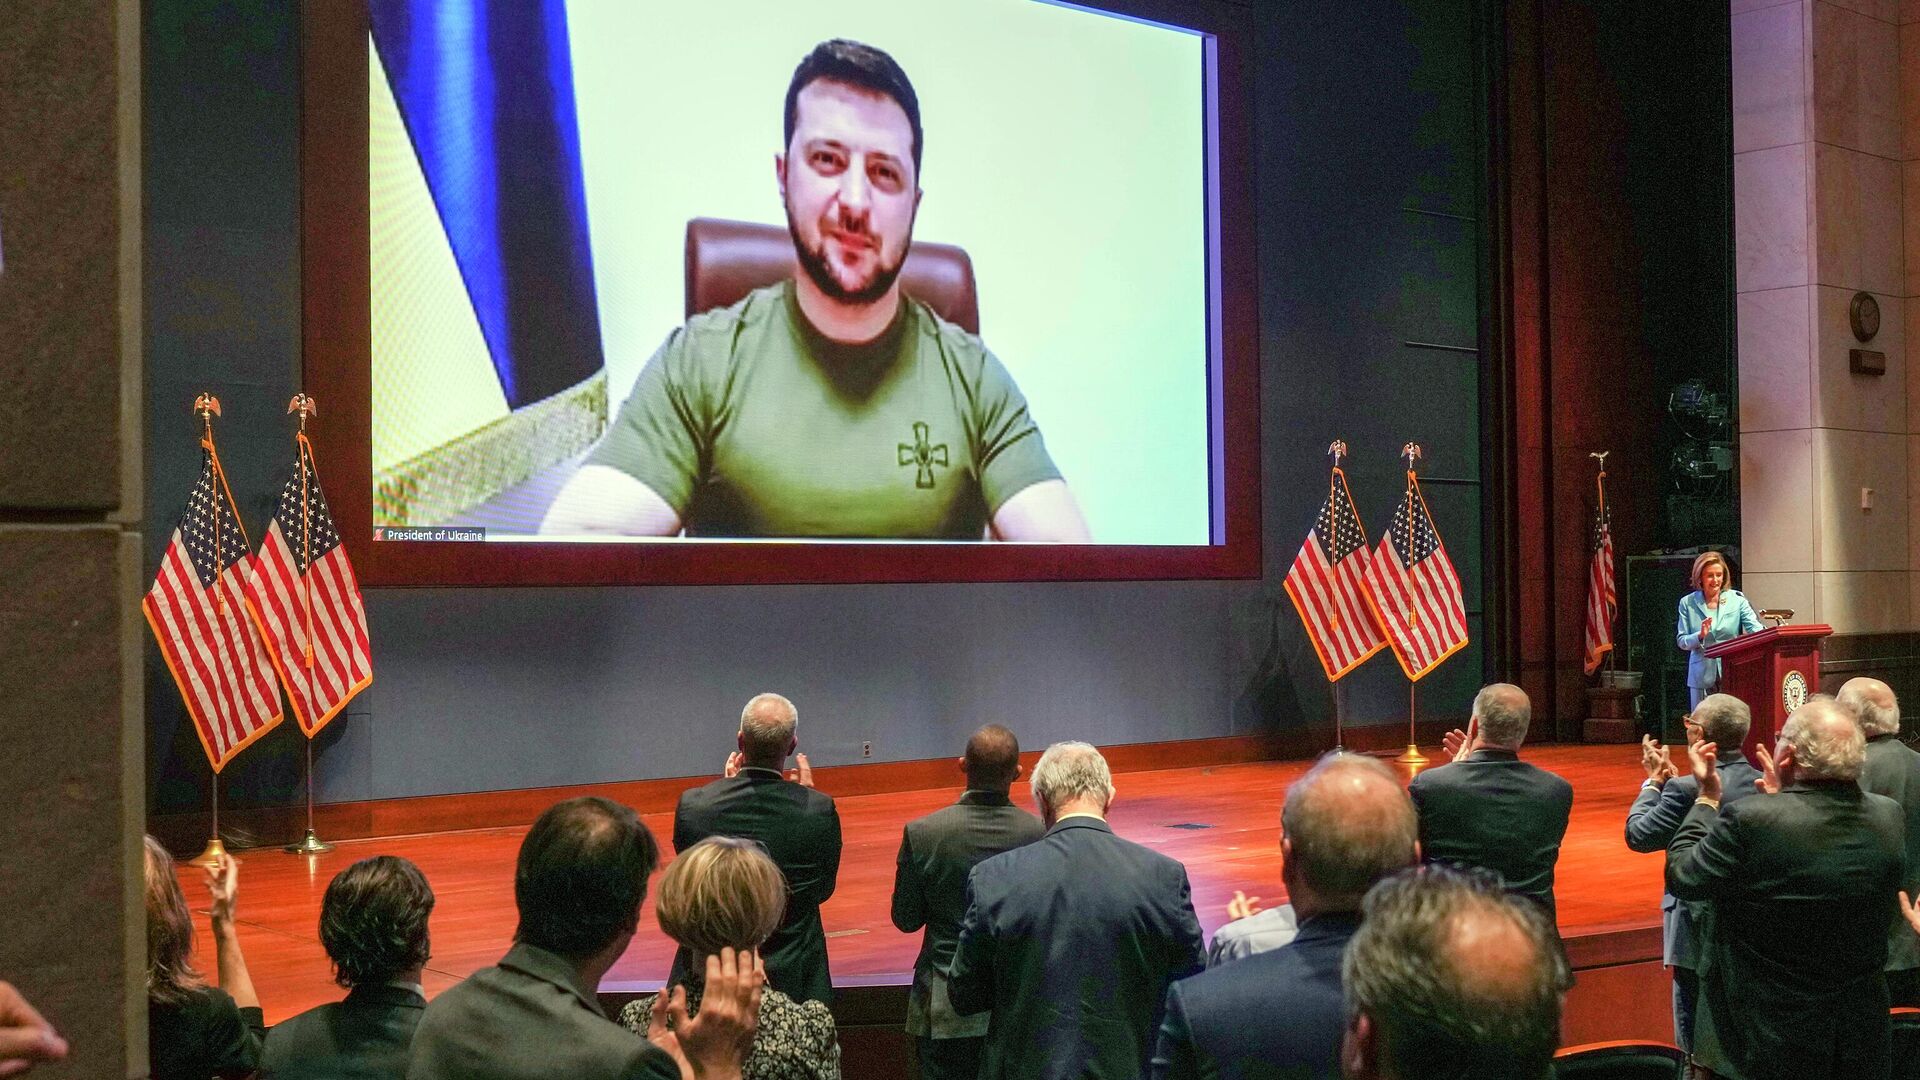 FILE - Members of Congress give Ukraine President Volodymyr Zelensky a standing ovation before he speaks in a virtual address to Congress in the U.S. Capitol Visitors Center Congressional Auditorium in Washington, on Wednesday, March 16, 2022 - Sputnik International, 1920, 14.06.2022